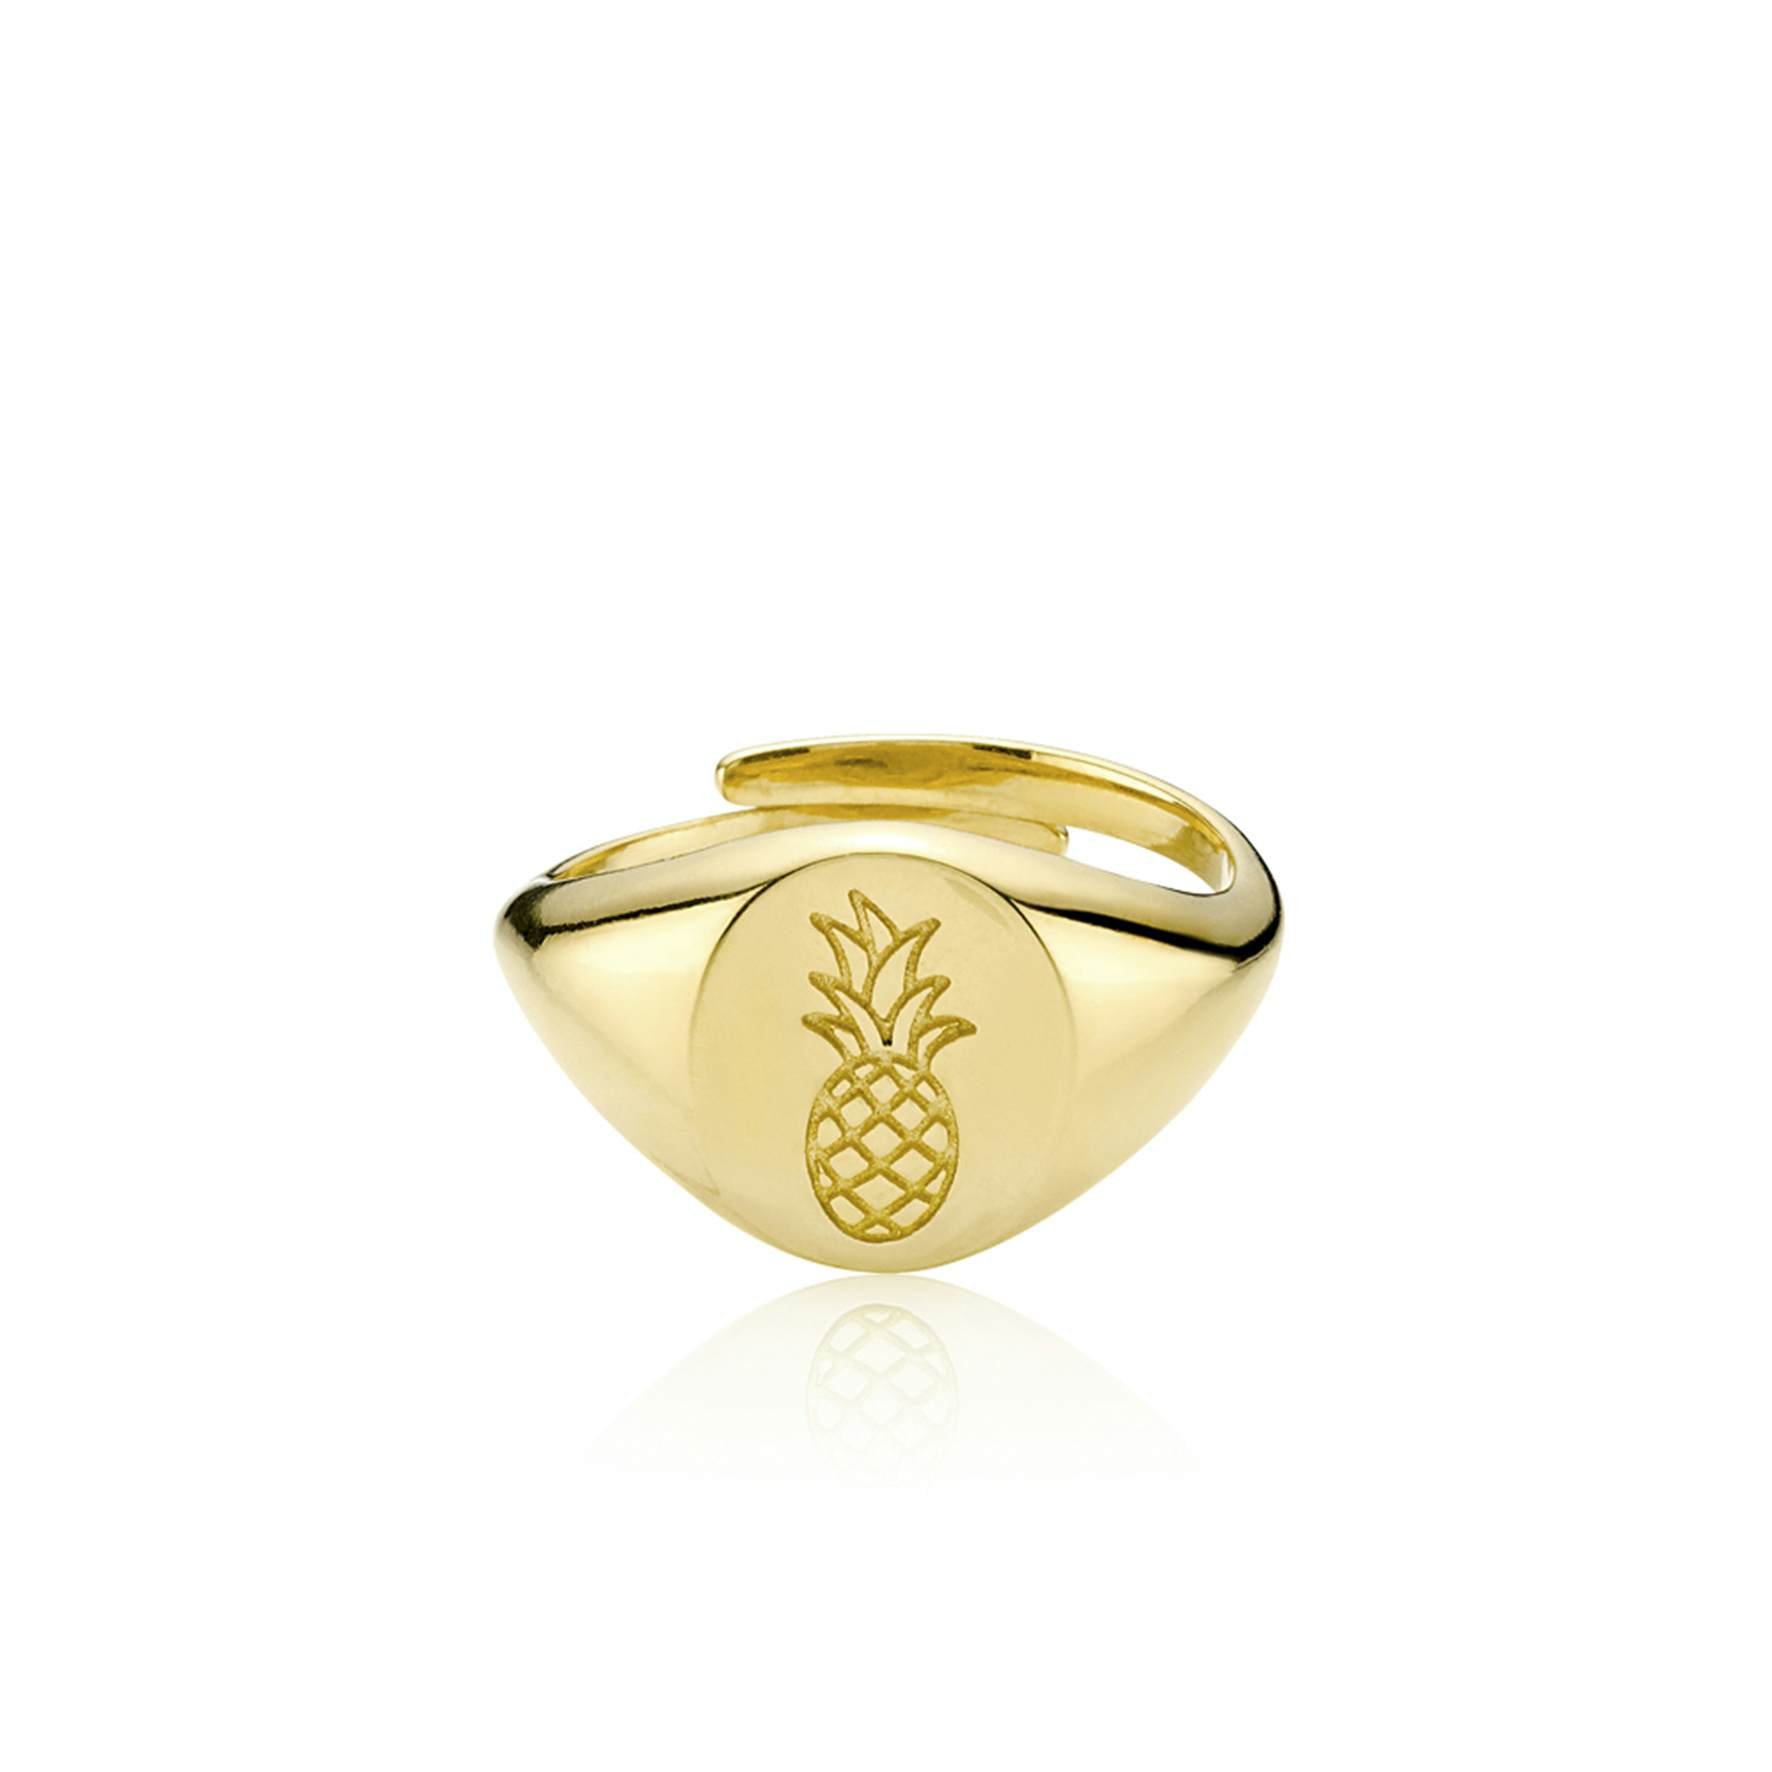 Anna By Sistie Round Ring from Sistie in Goldplated-Silver Sterling 925